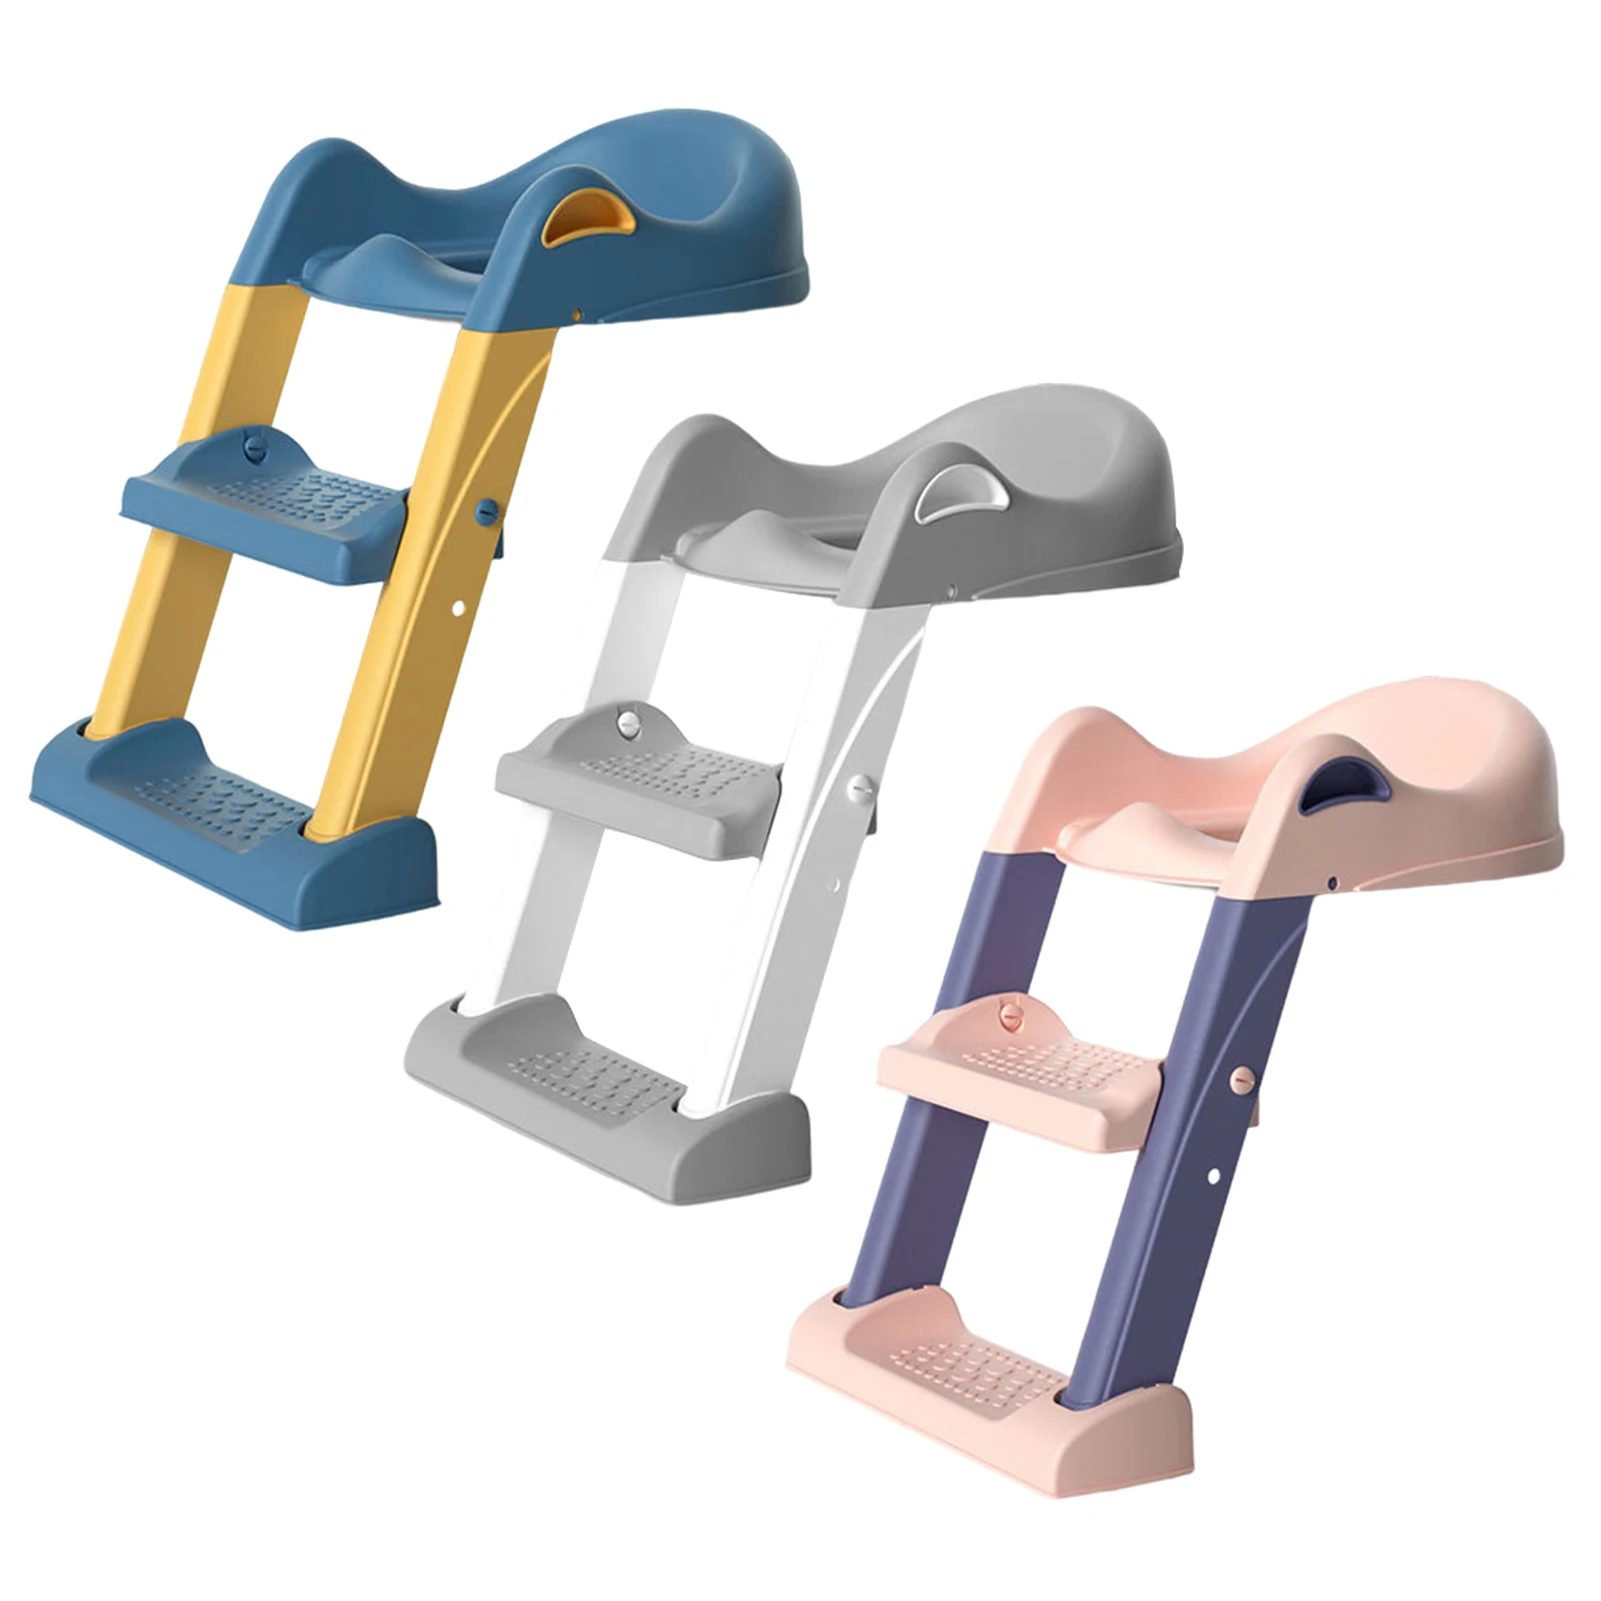 

Children Toilet Stair Baby Potty Stair Seat Step Stool Ladder Training Seat Chair Folding Infant Kids Toilet incredible